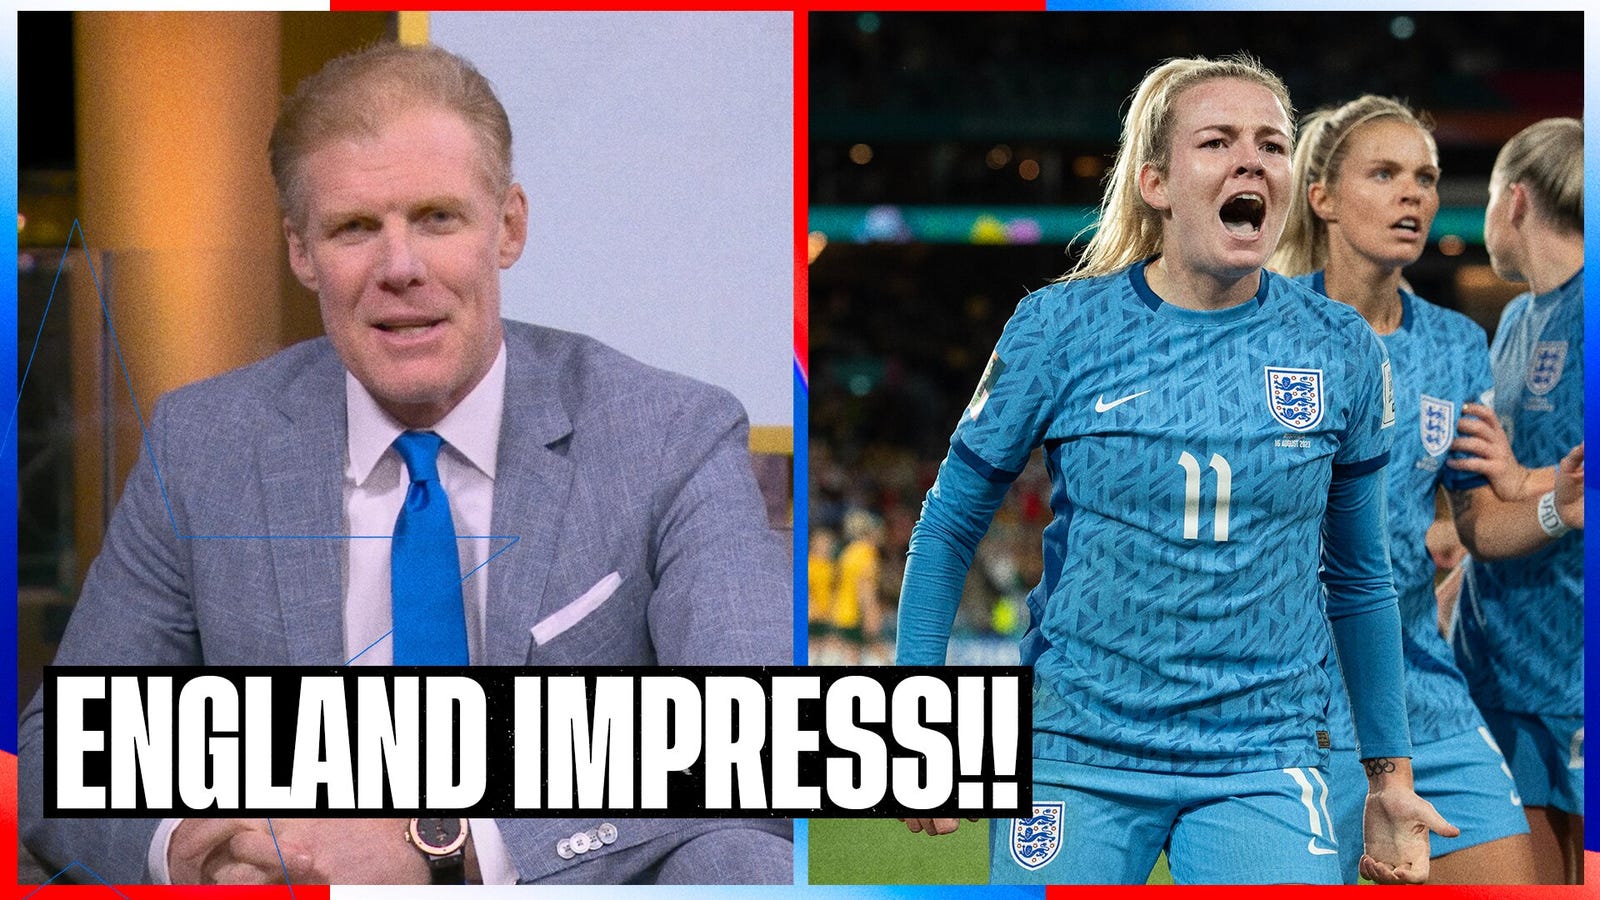 Alexi Lalas reacts to England's dominant semifinal win